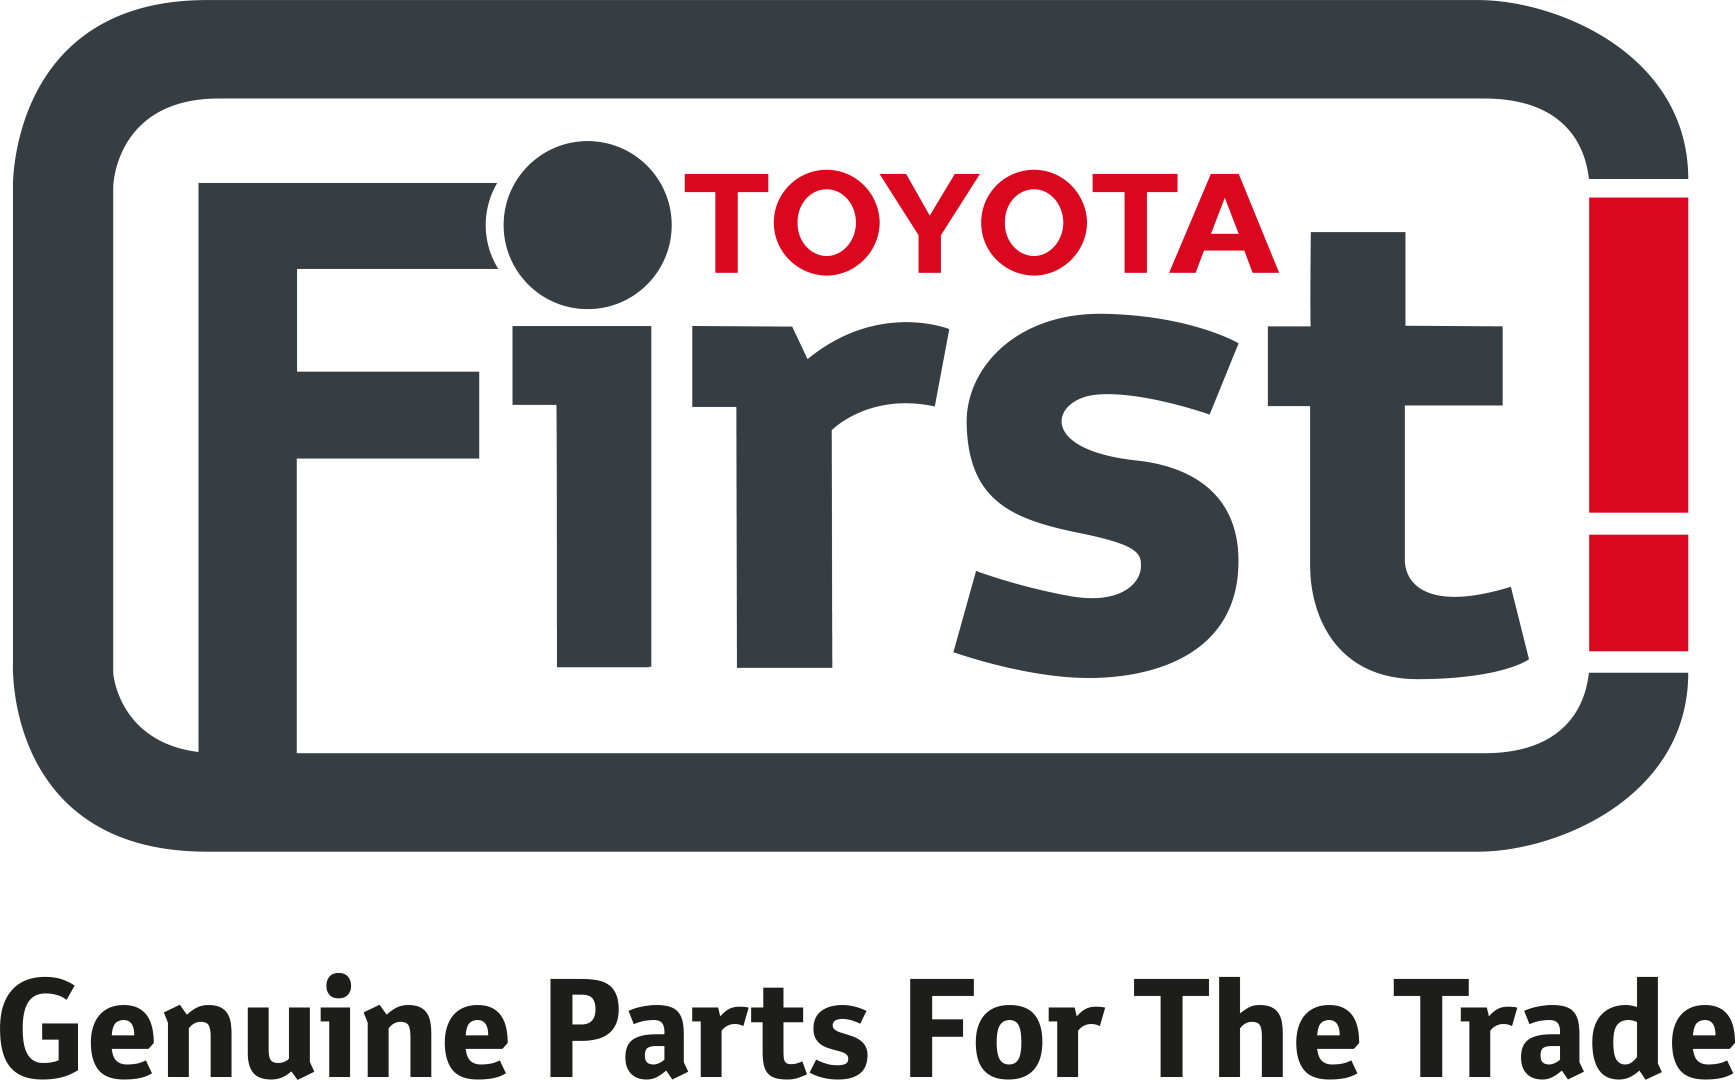 Toyota First